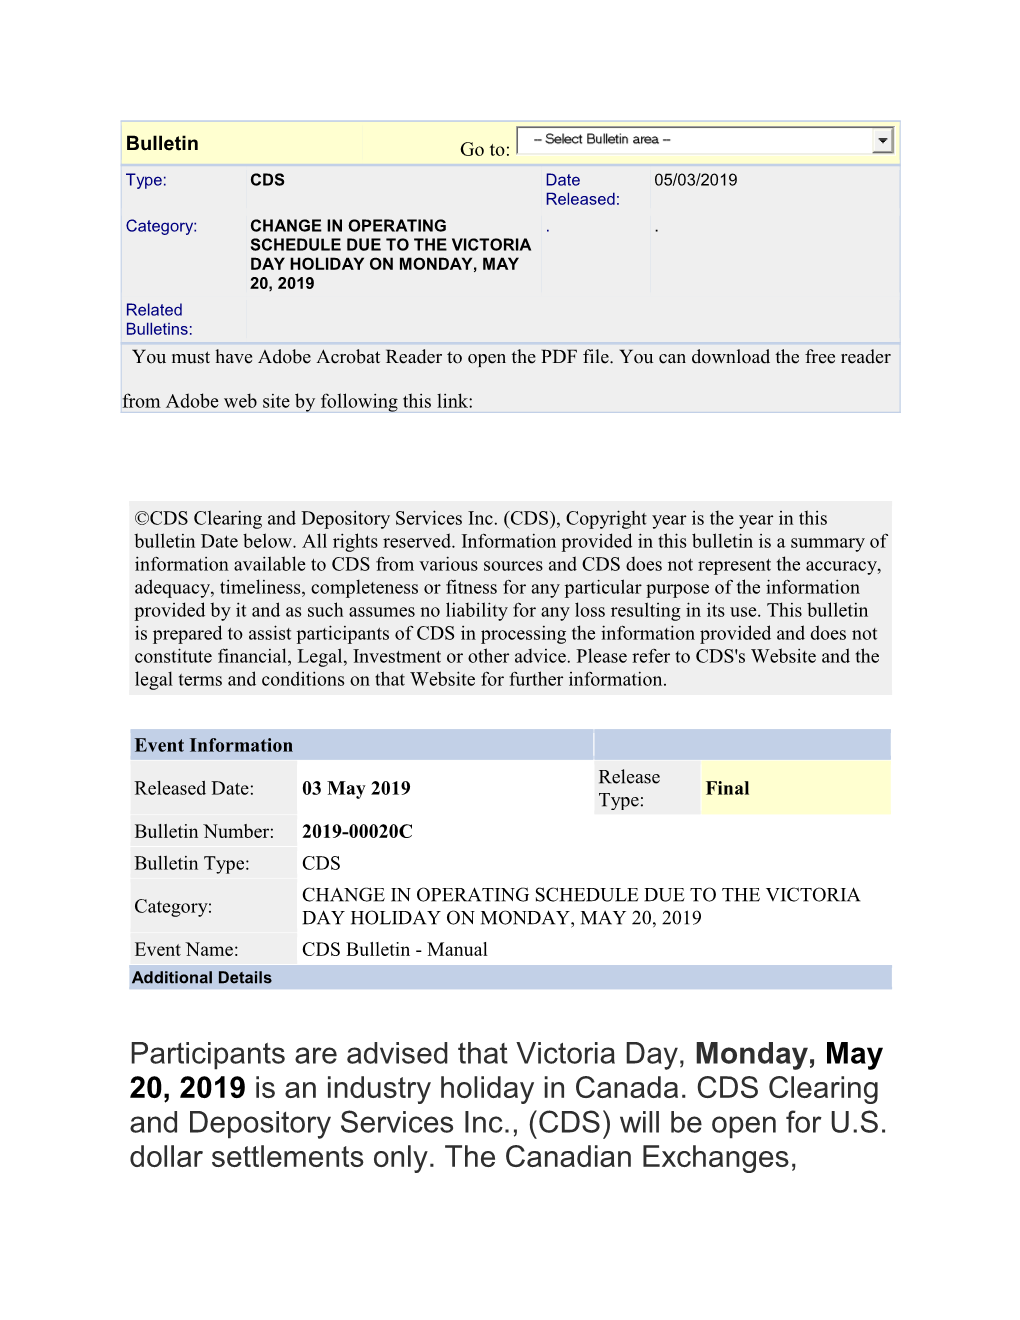 Participants Are Advised That Victoria Day, Monday, May 20, 2019 Is an Industry Holiday in Canada. CDS Clearing and Depository S